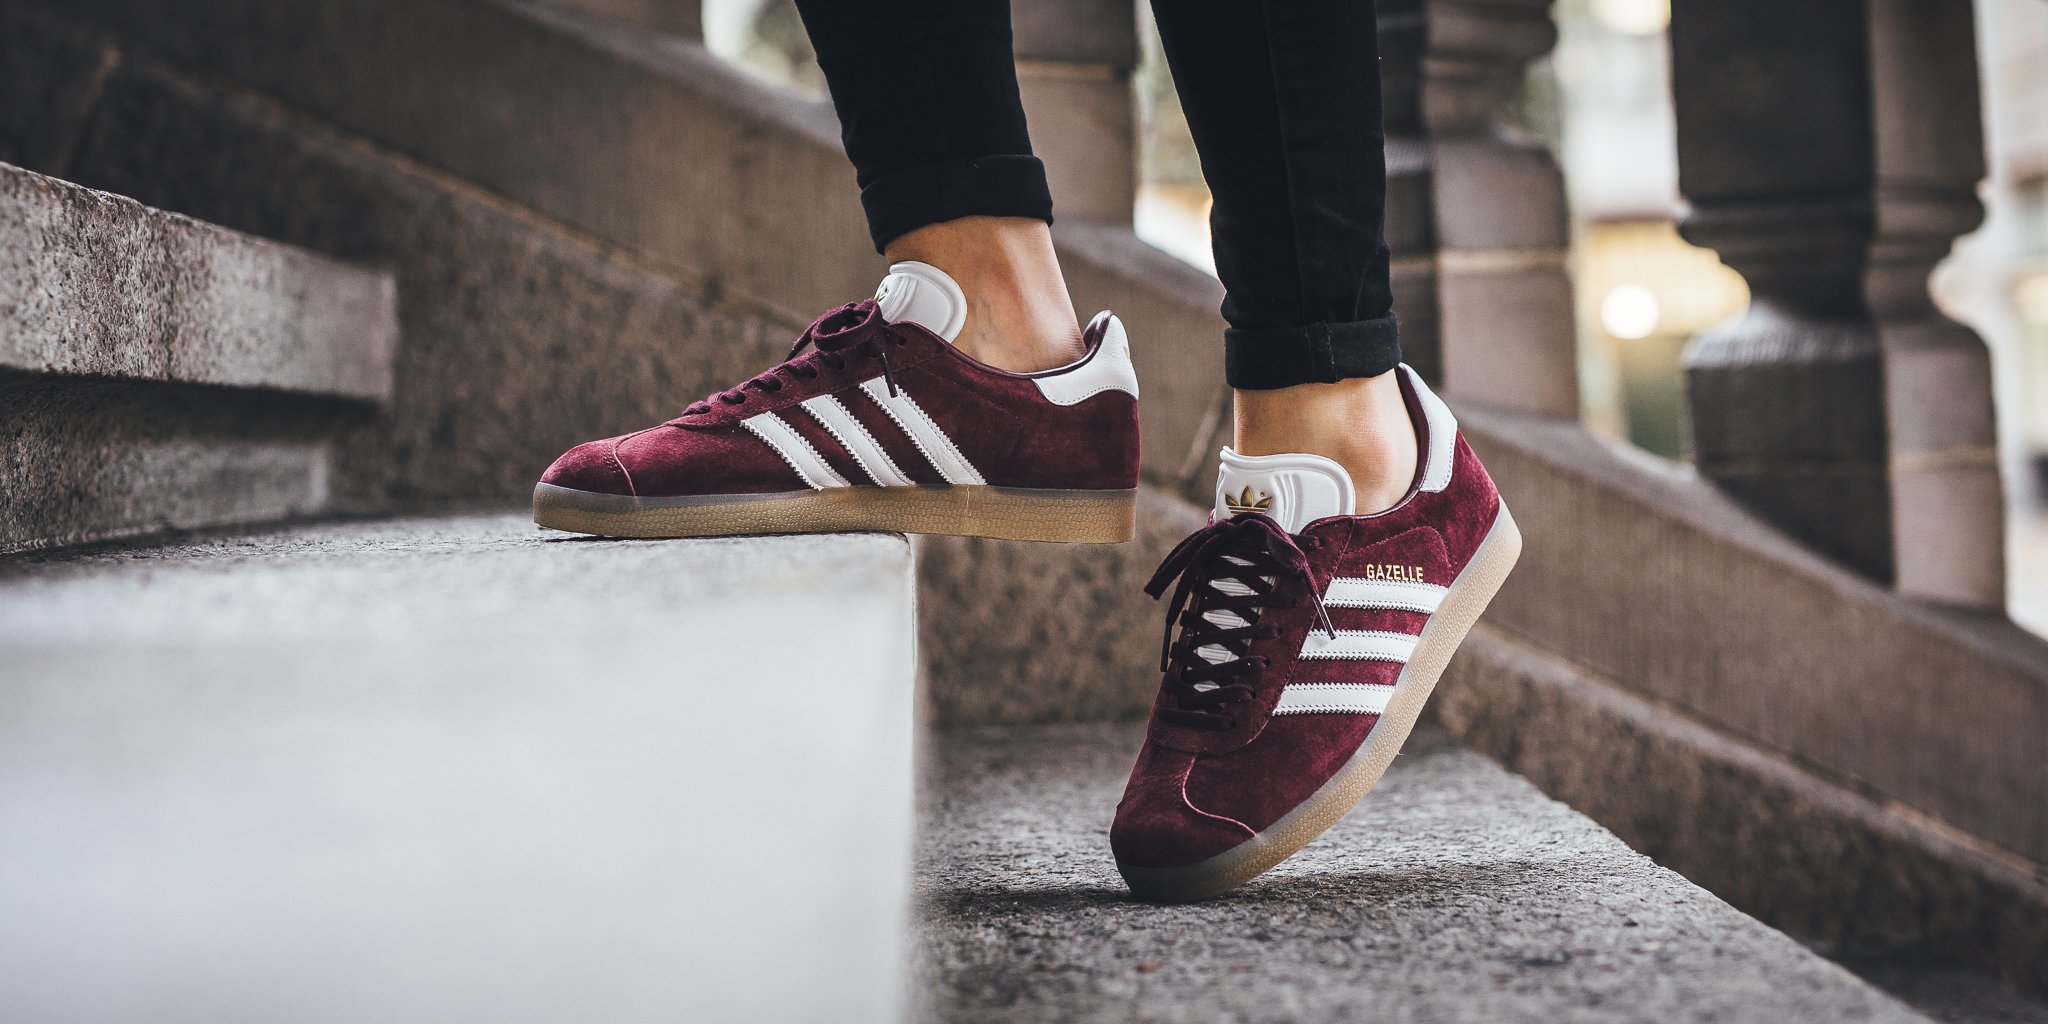 Oblongo Supervisar Pigmento Titolo on Twitter: "NEW IN! Adidas Gazelle - Maroon/White/Gold Metallic  SHOP HERE: https://t.co/9FCbm27yox US 4 - US 11.5 https://t.co/p7BH14e06i"  / Twitter